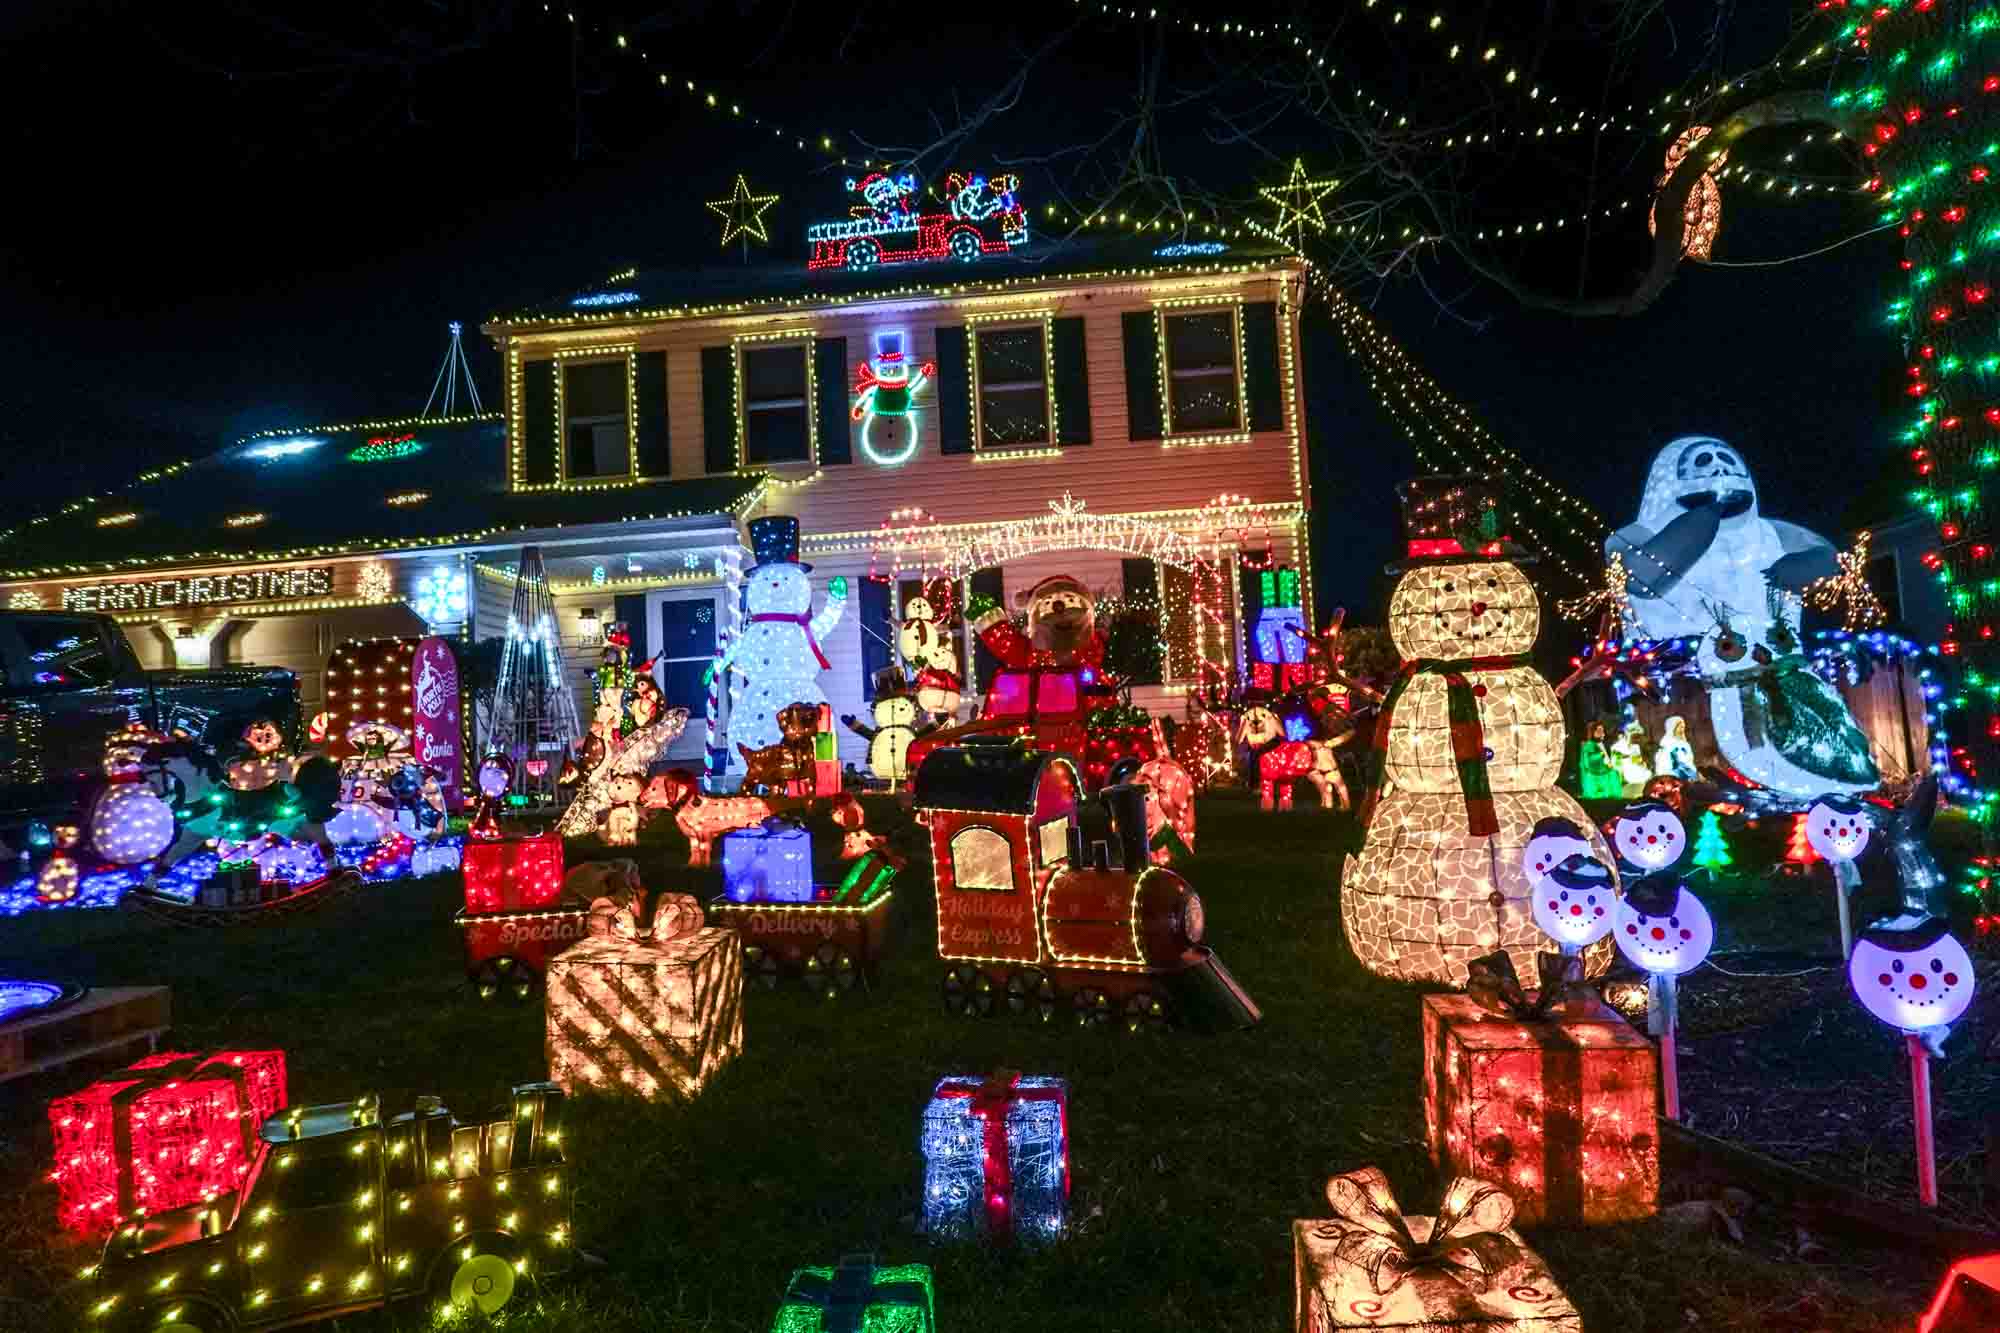 Illuminated presents, snowmen, and other decorations in a front yard.